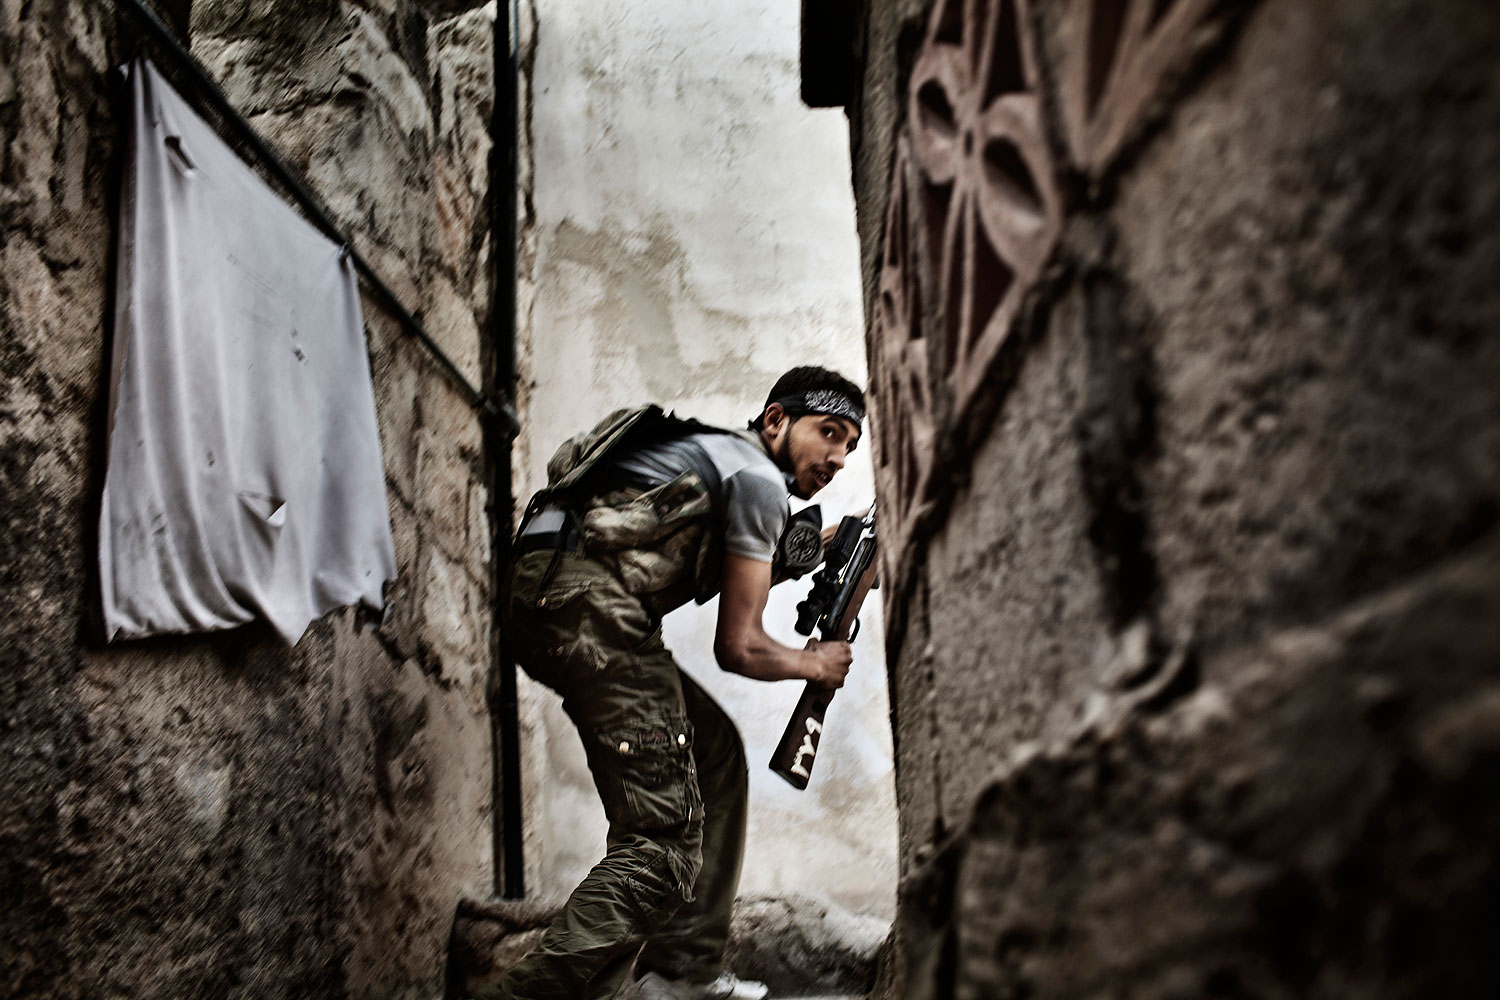 2nd Prize Spot News Stories. Fabio Bucciarelli, Italy. 10 October 2012, Aleppo, Syria. A Free Syrian Army fighter takes up a position during clashes against government forces in the Sulemain Halabi district.